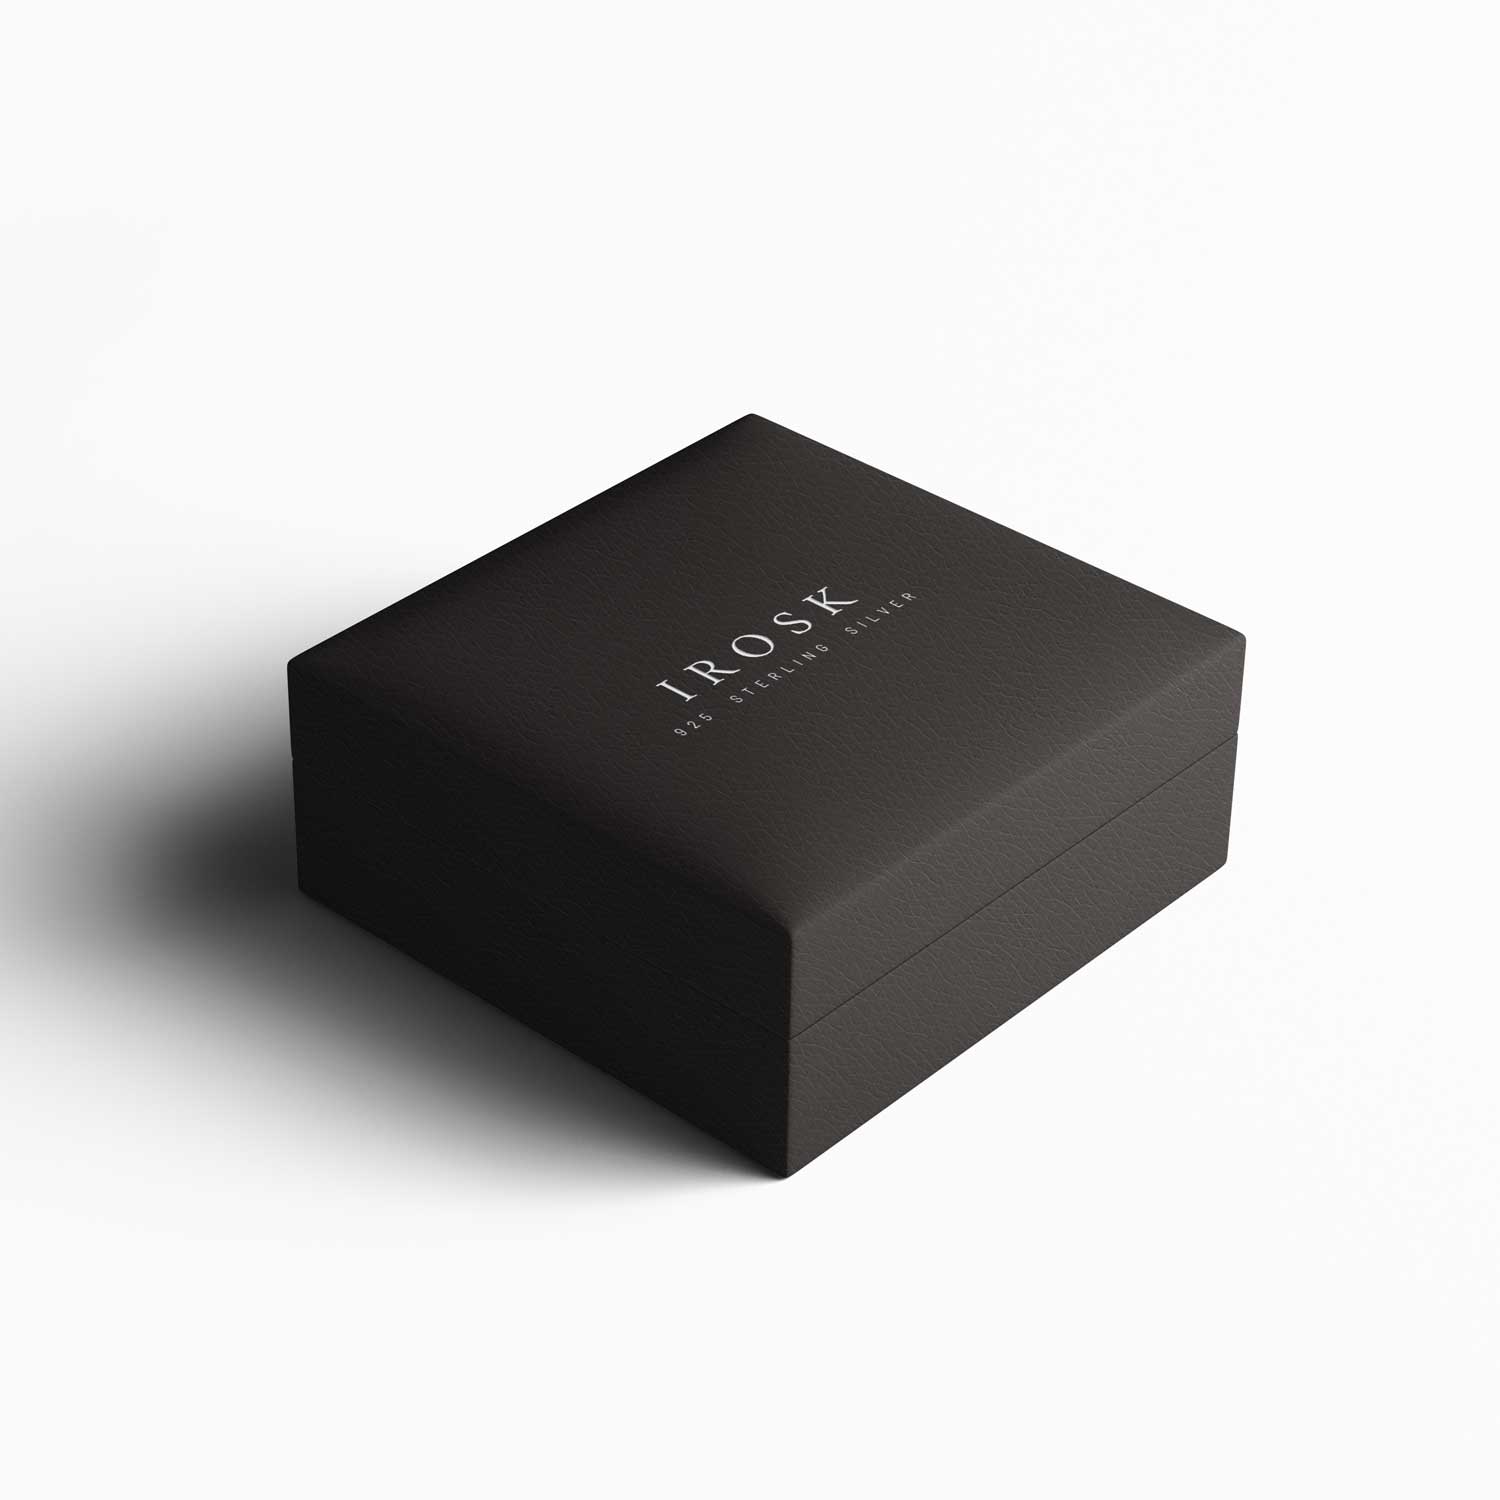 black irosk jewellery box at an angle with light background